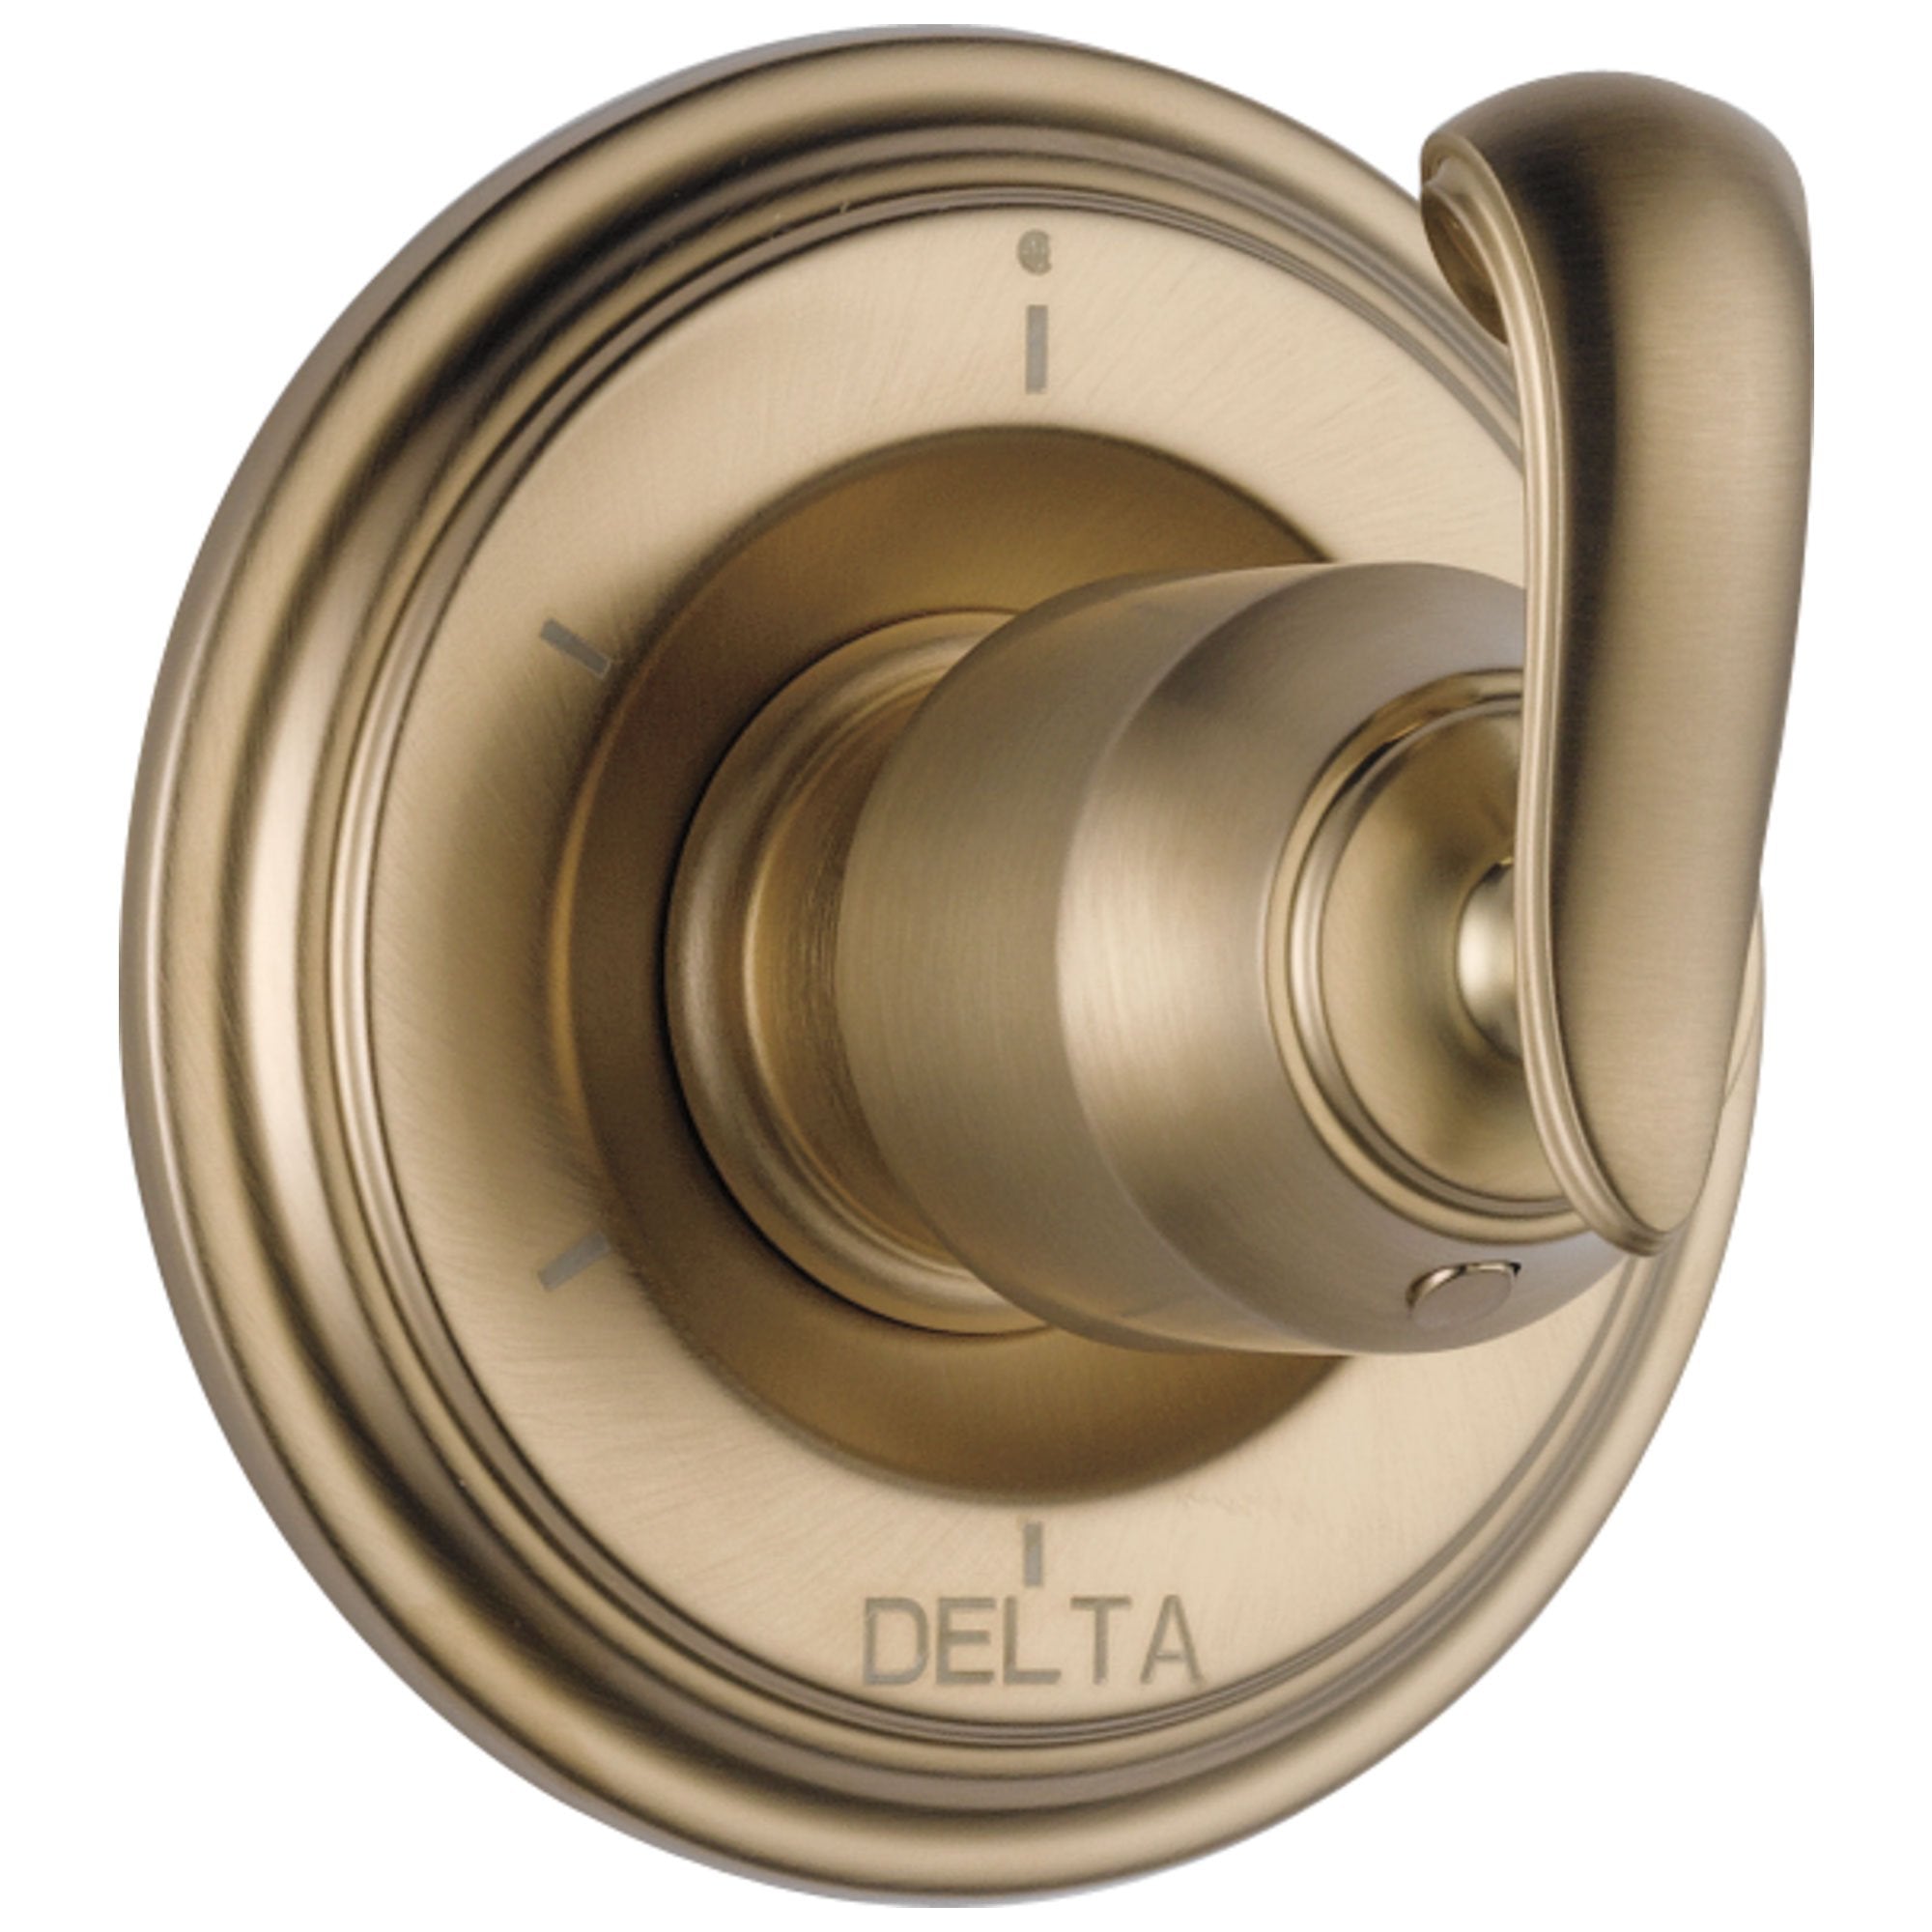 Delta Cassidy Collection Champagne Bronze Finish 6-Setting 3-Port Shower Diverter INCLUDES French Scroll Lever Handle and Rough-in Valve D1894V